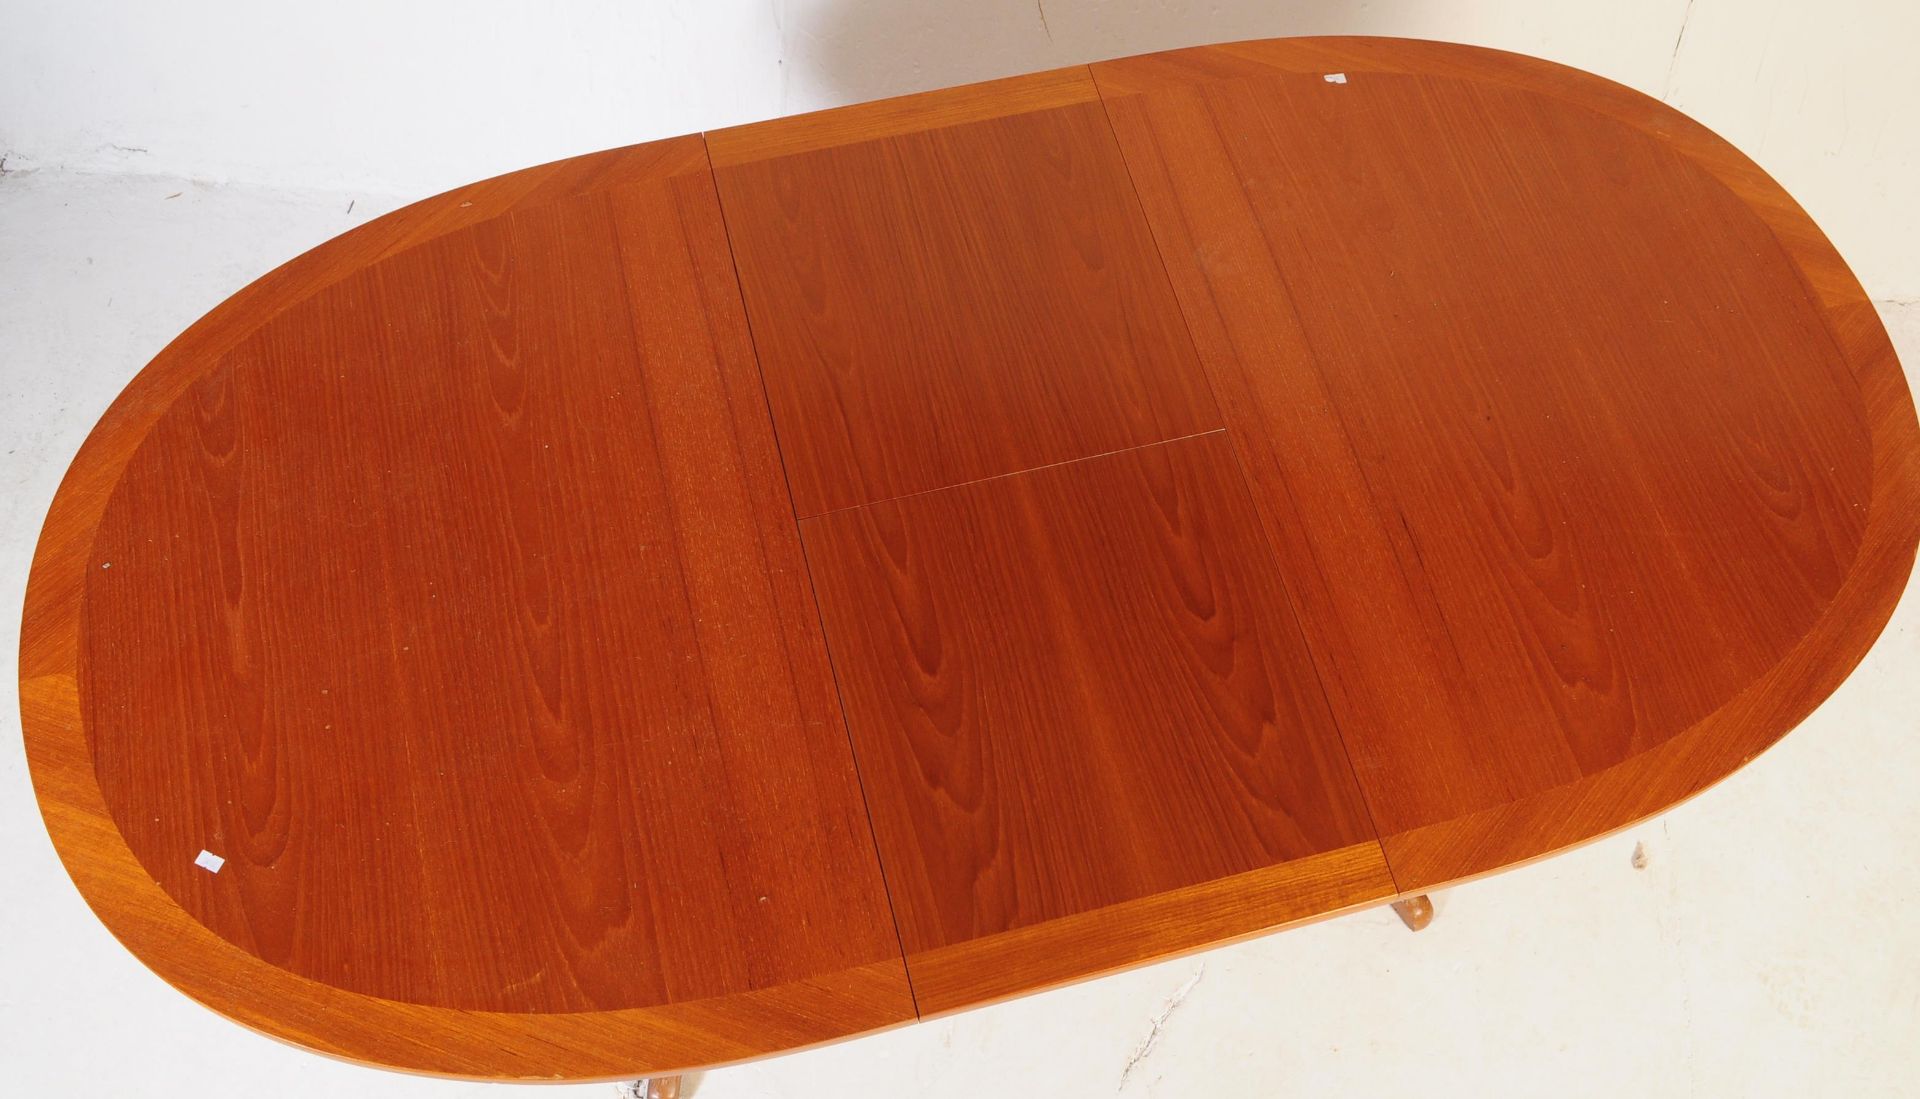 RETRO NATHAN FURNITURE DINING TABLE WITH DANISH STYLE CHAIRS - Image 4 of 7